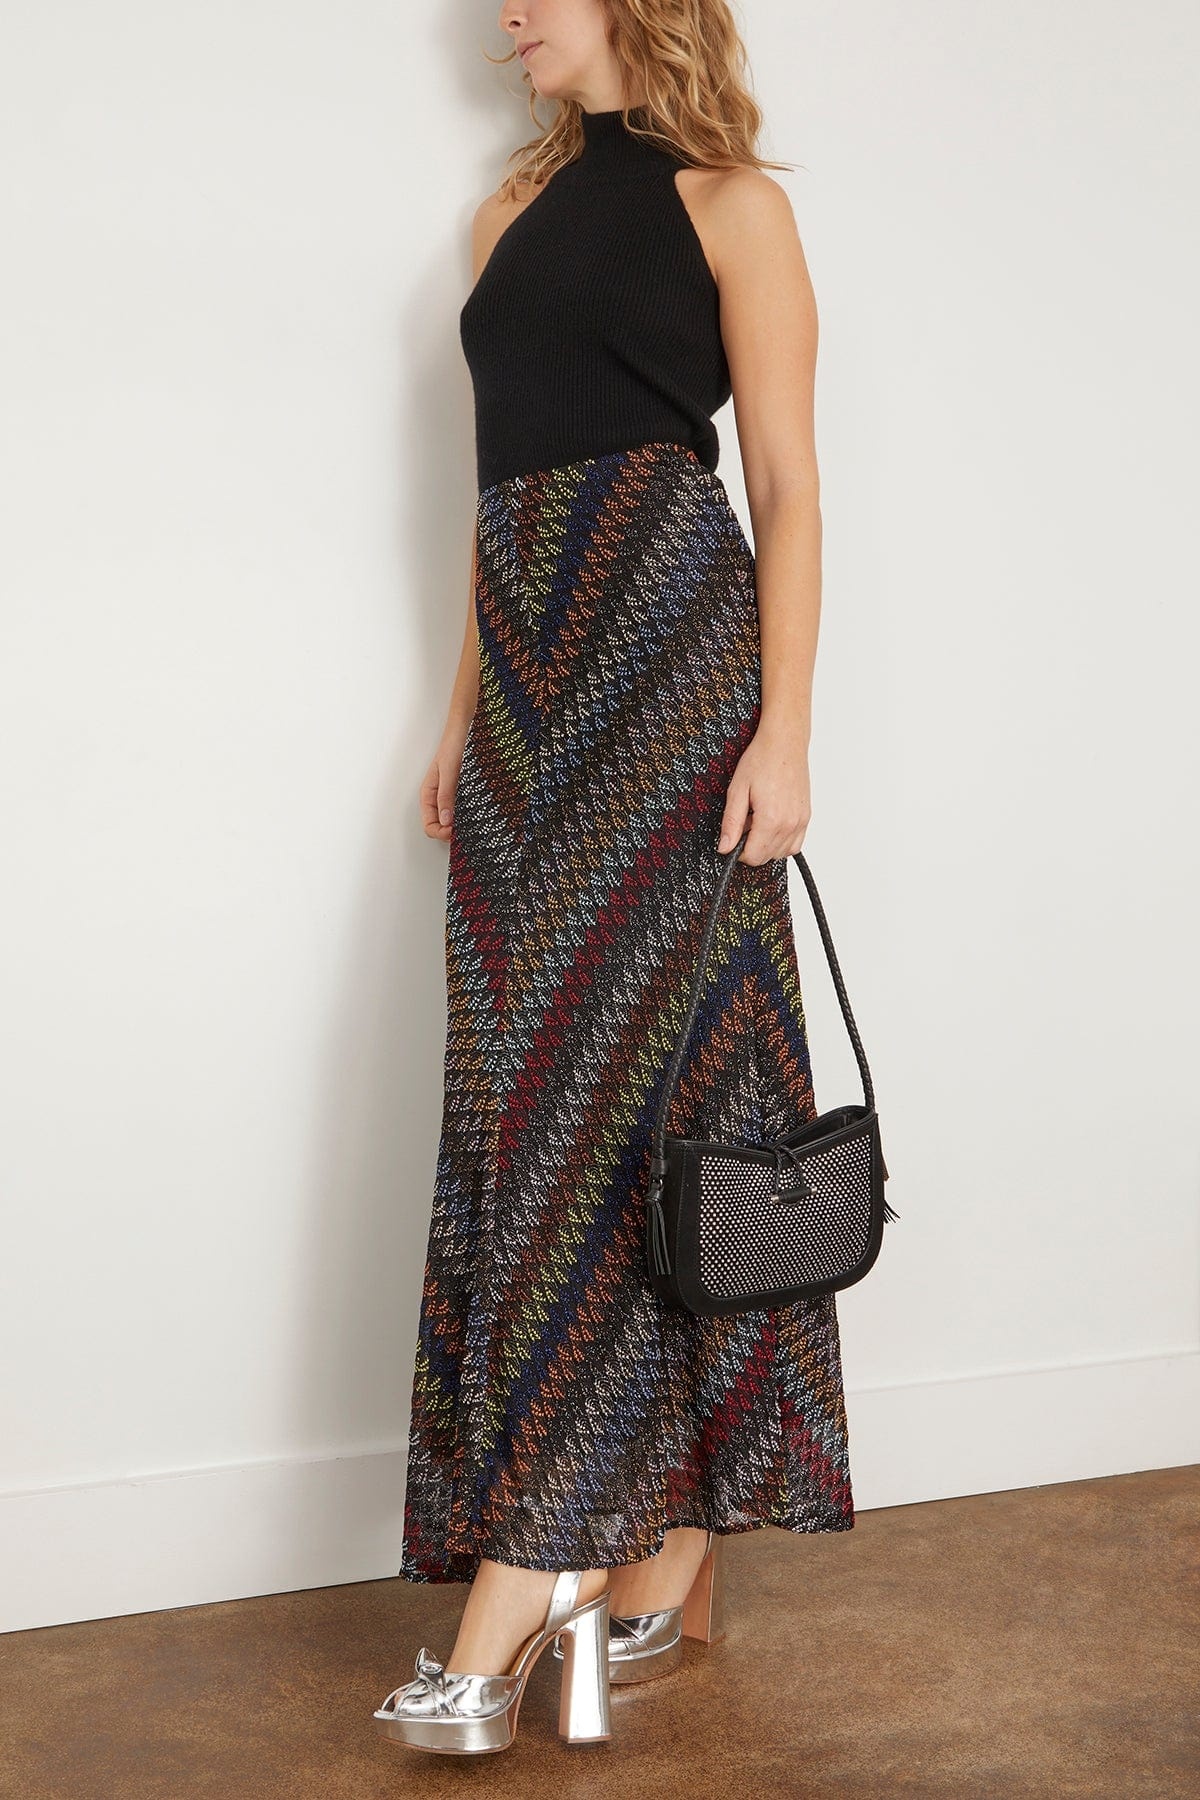 Long Skirt in Dark Base and Multi Color Relief - 2